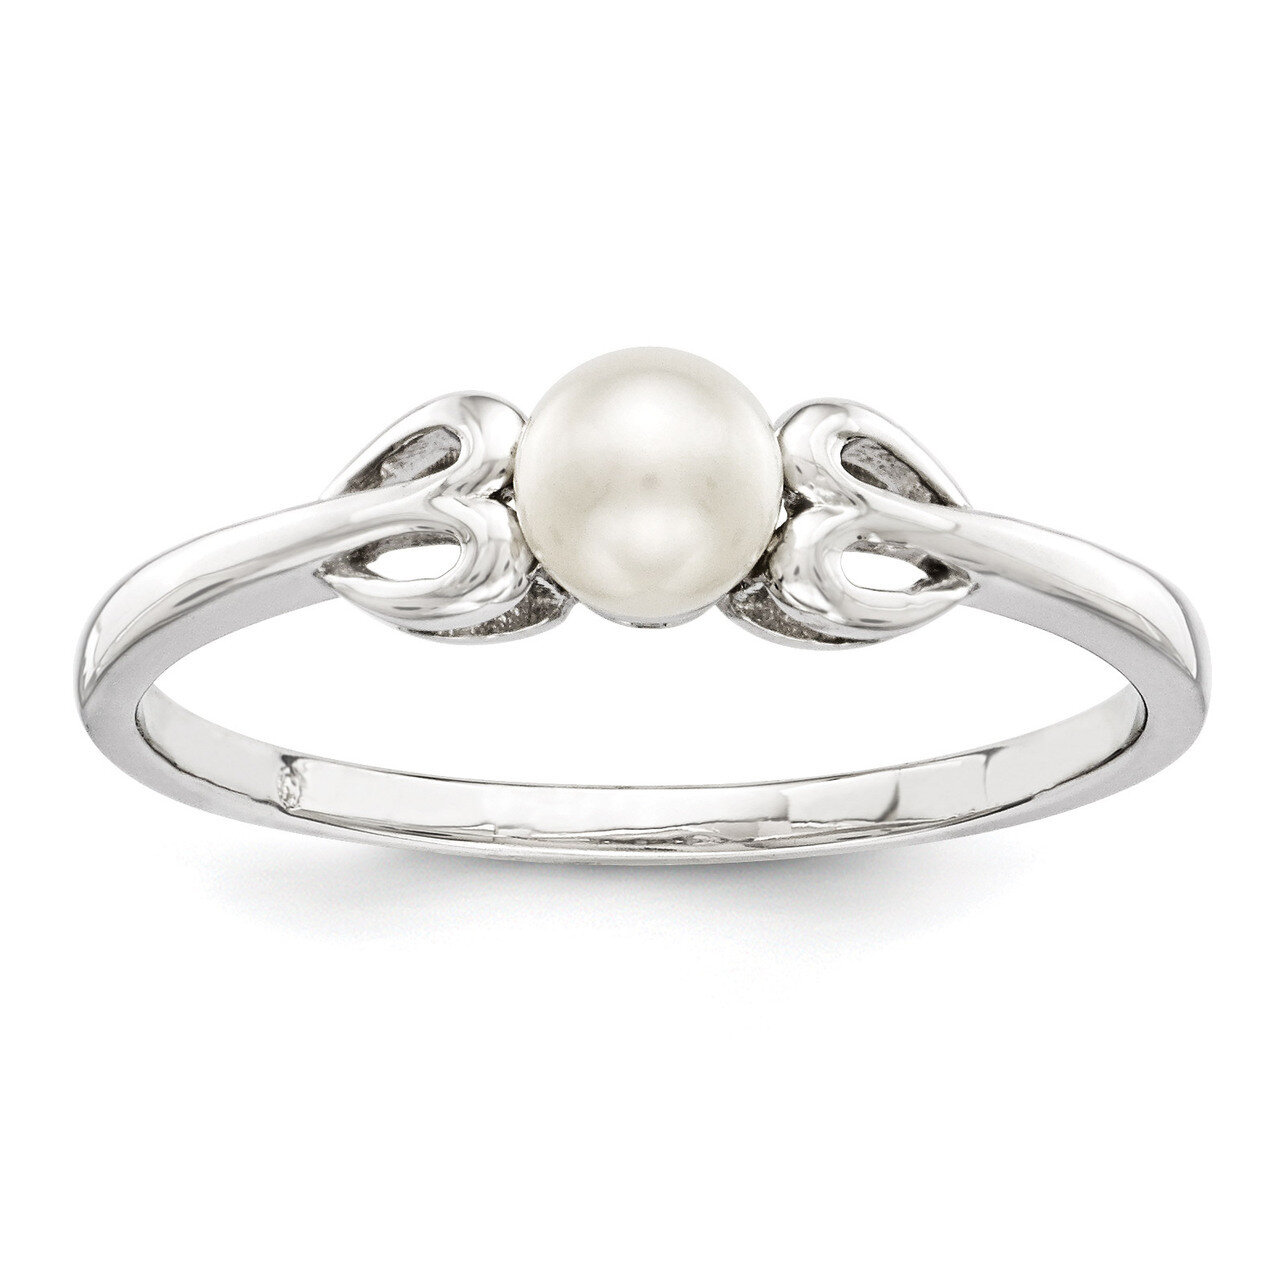 Pearl June Ring Sterling Silver Cultured QBR20JUN